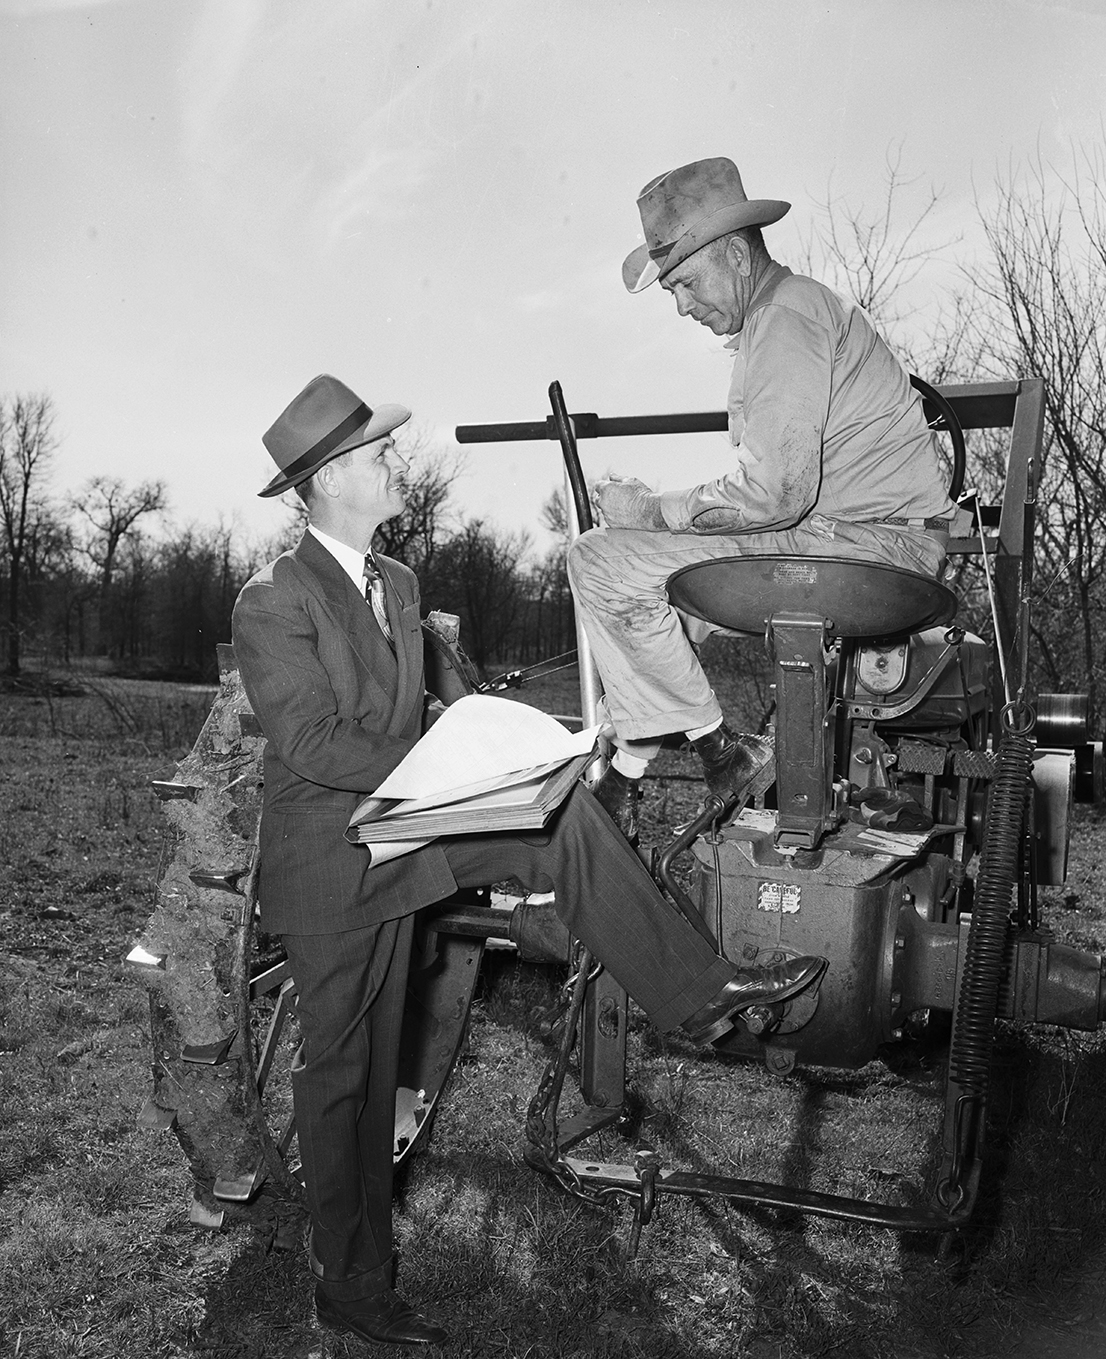 Willard Kemplin, who farms in Cooke County, at Valley View, pulled up on his tractor to answer census questions of Tim Osborn, Gainesville census crew leader. March 1950.